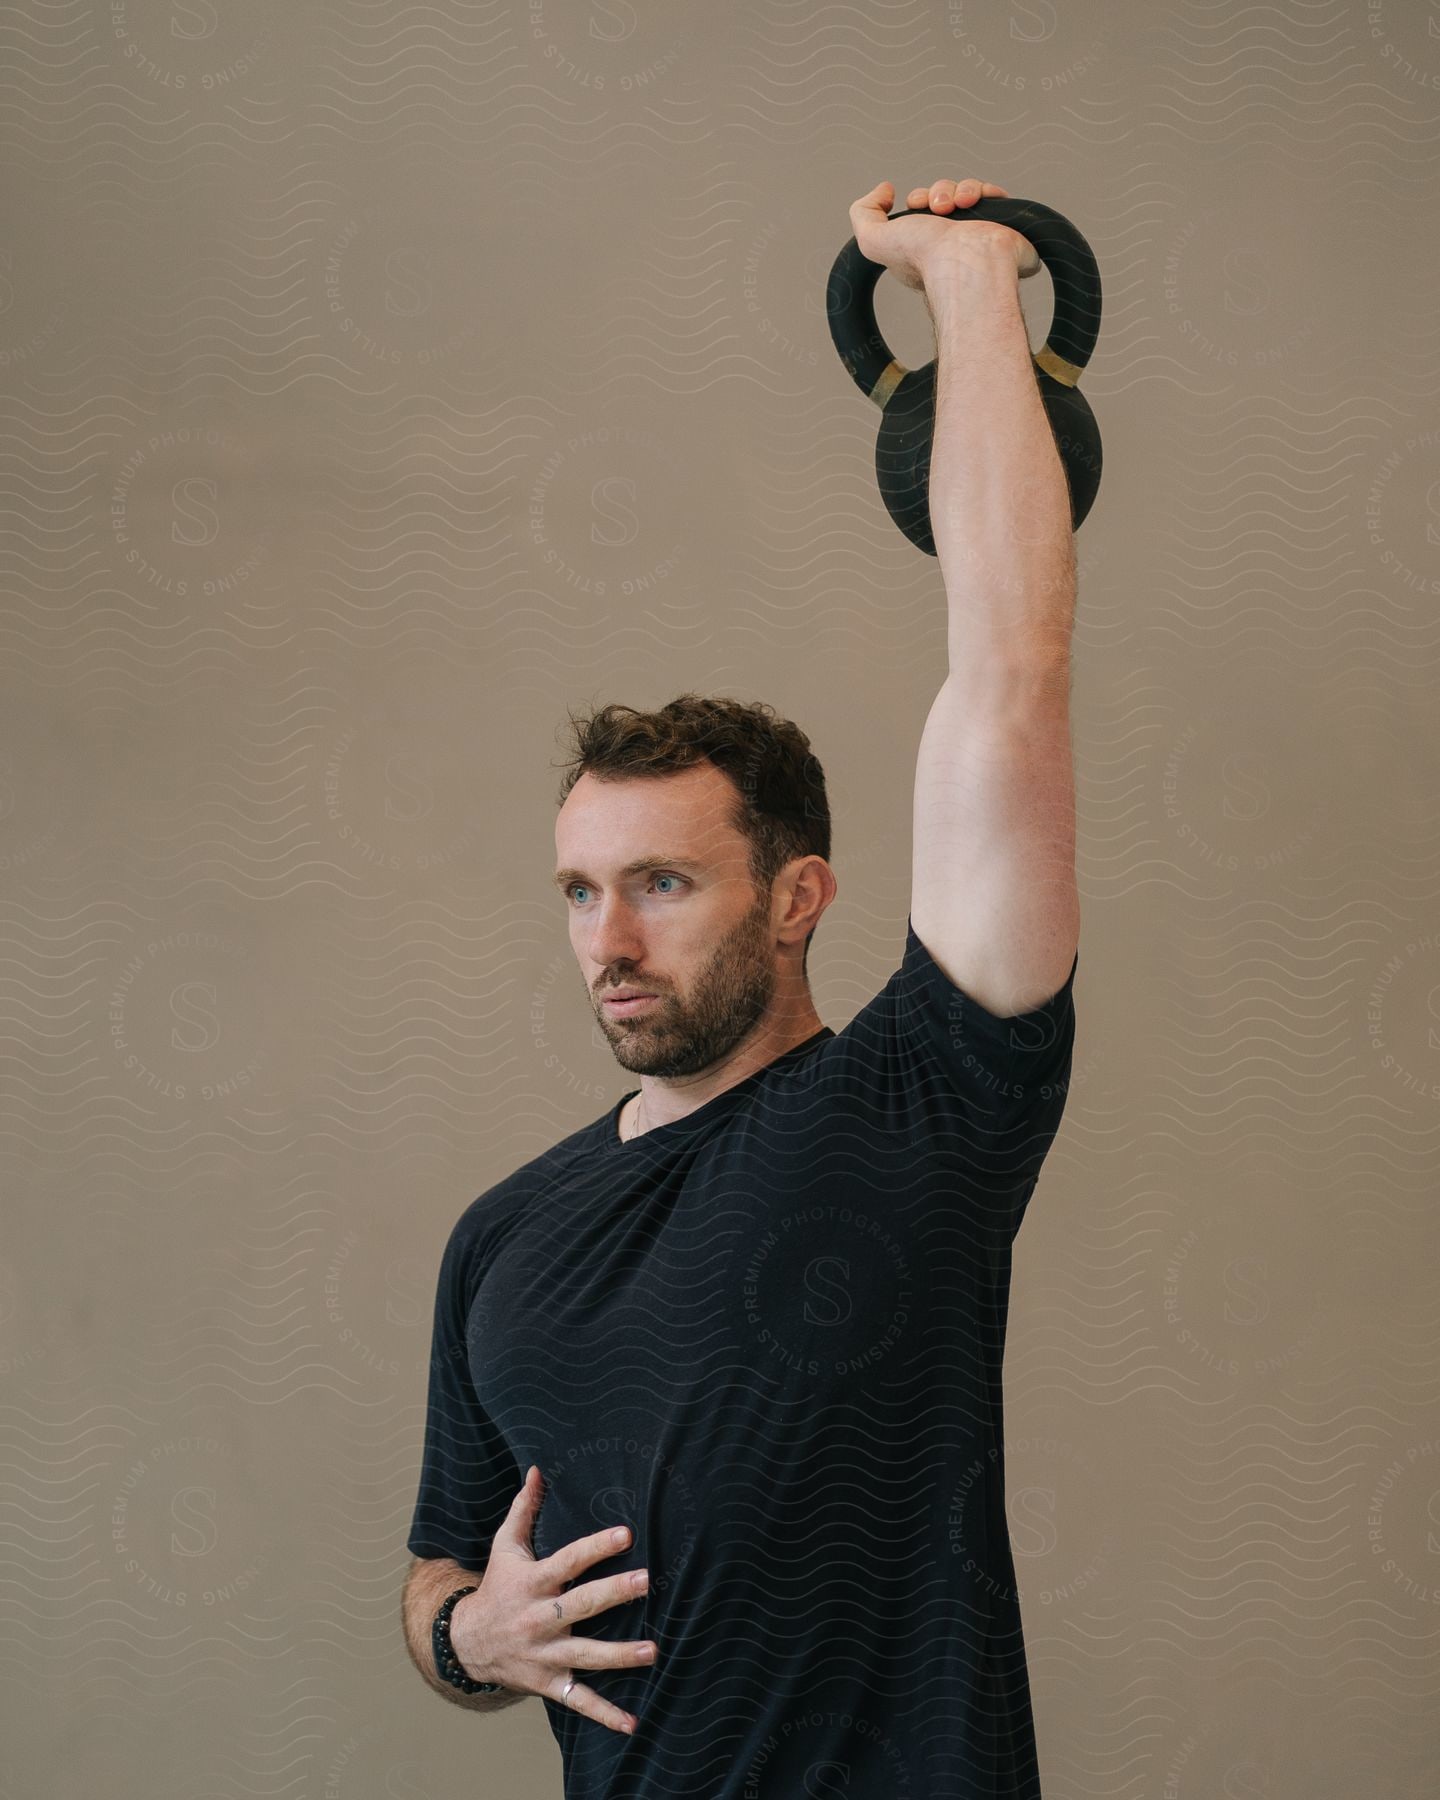 A bearded man wearing a black shirt is lifting a gym weight upwards with his left arm.